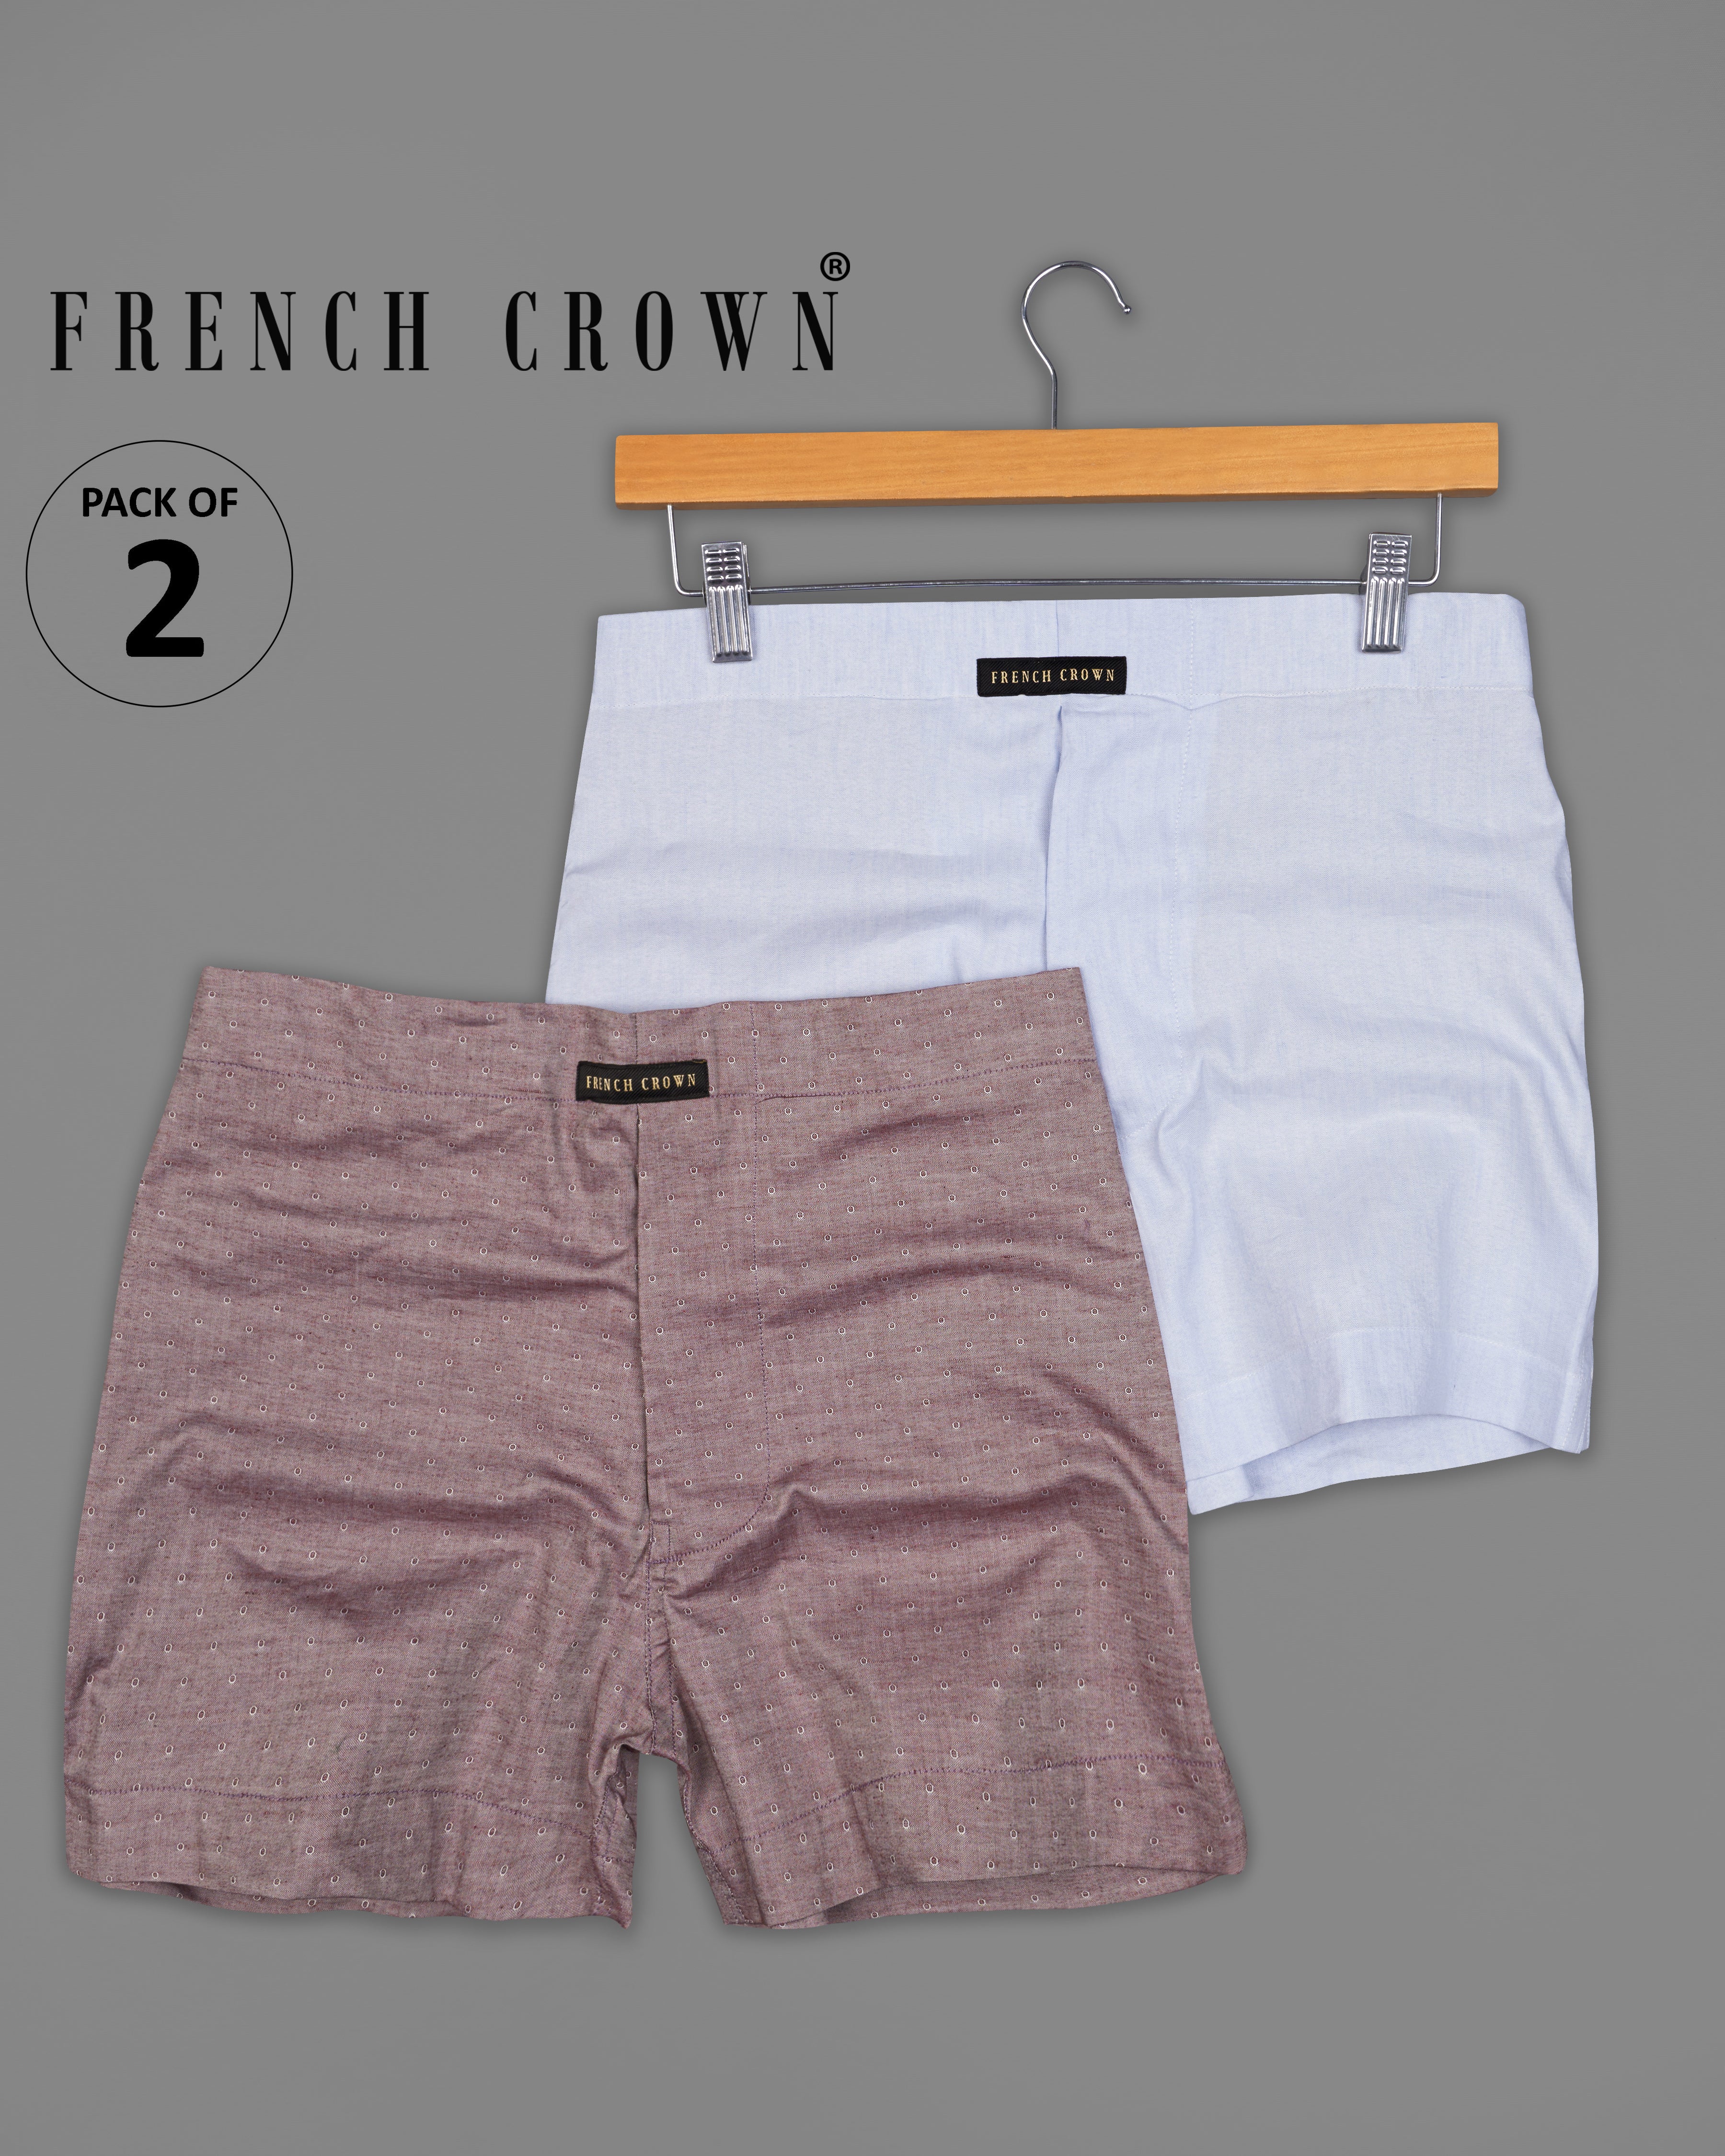 Cinereous Brown Dobby Boxers with Gainsboro Sky Blue Luxurious Linen Boxers